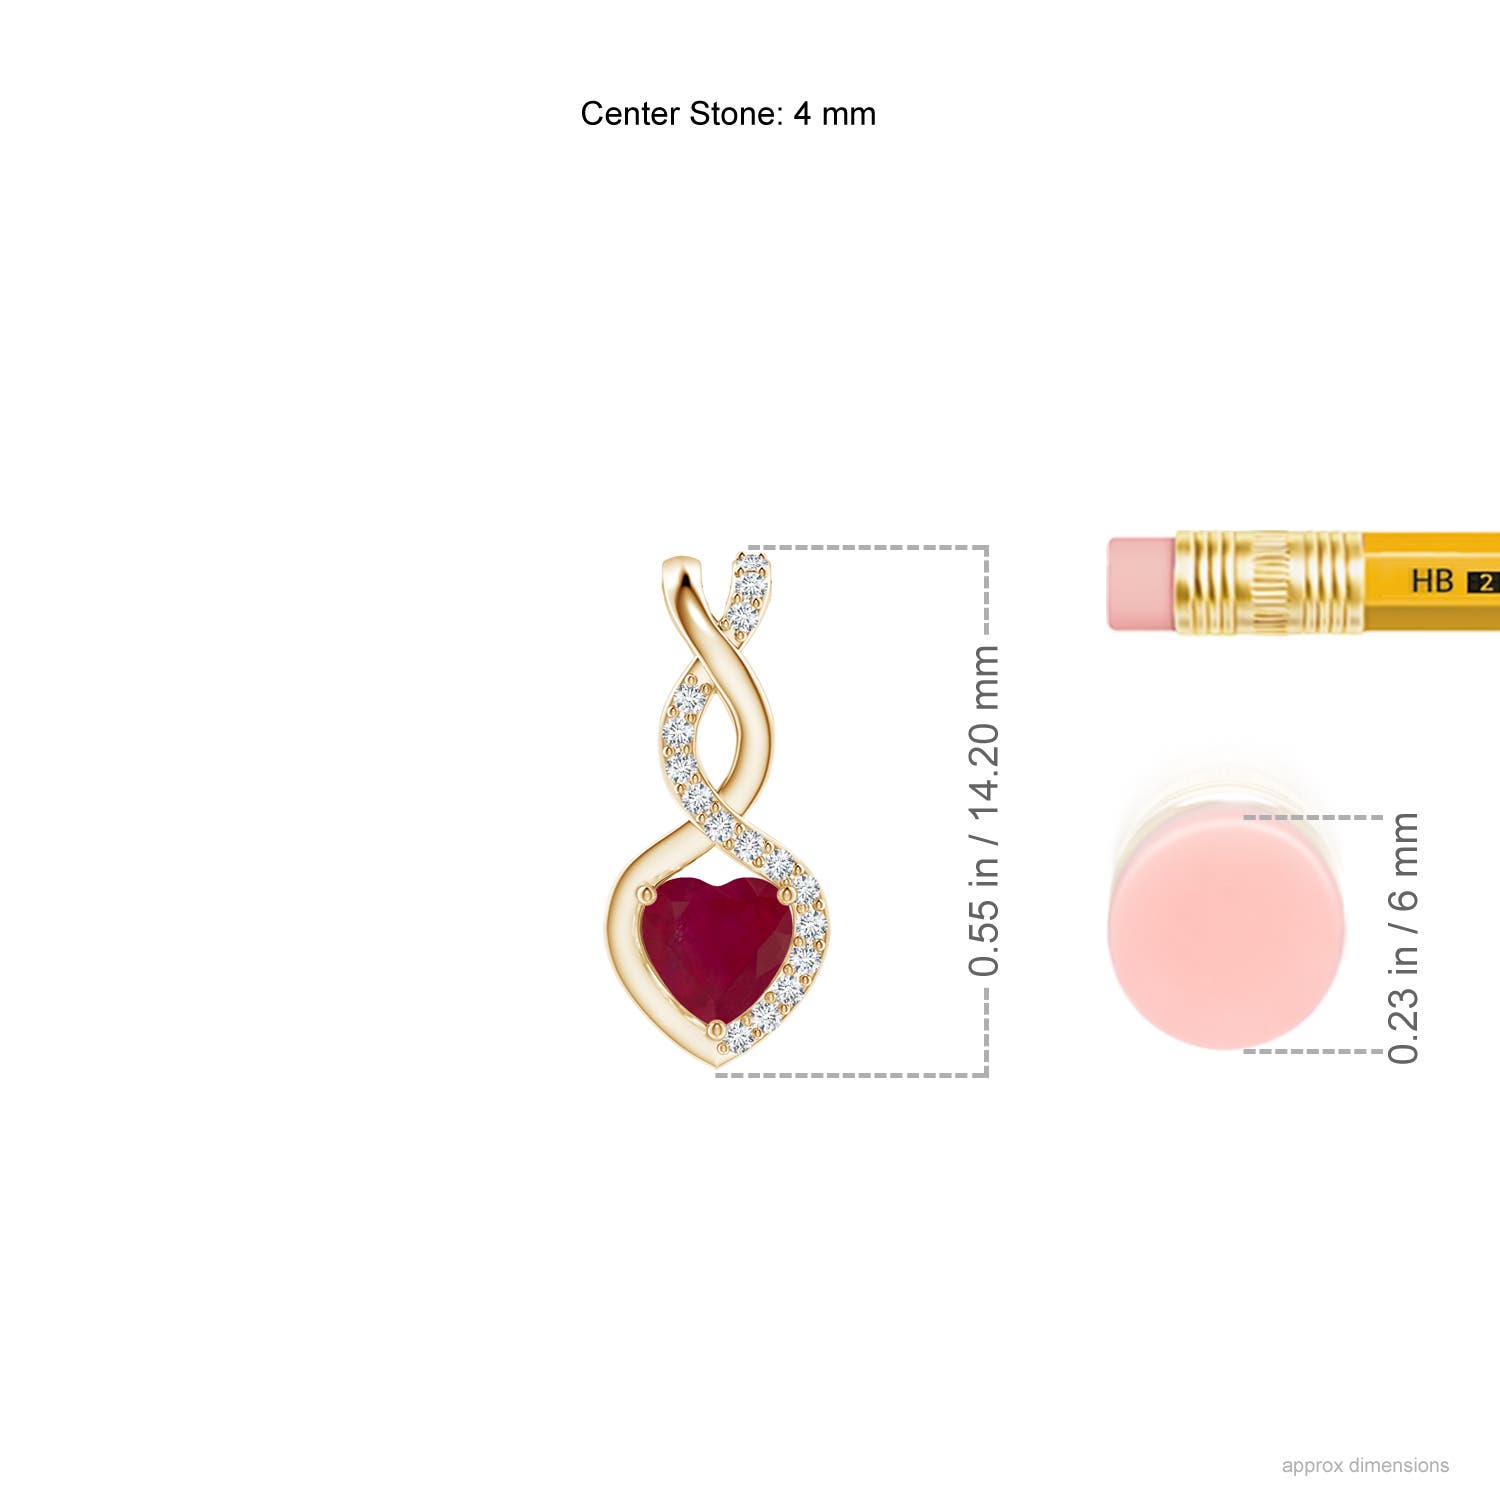 A - Ruby / 0.35 CT / 14 KT Yellow Gold